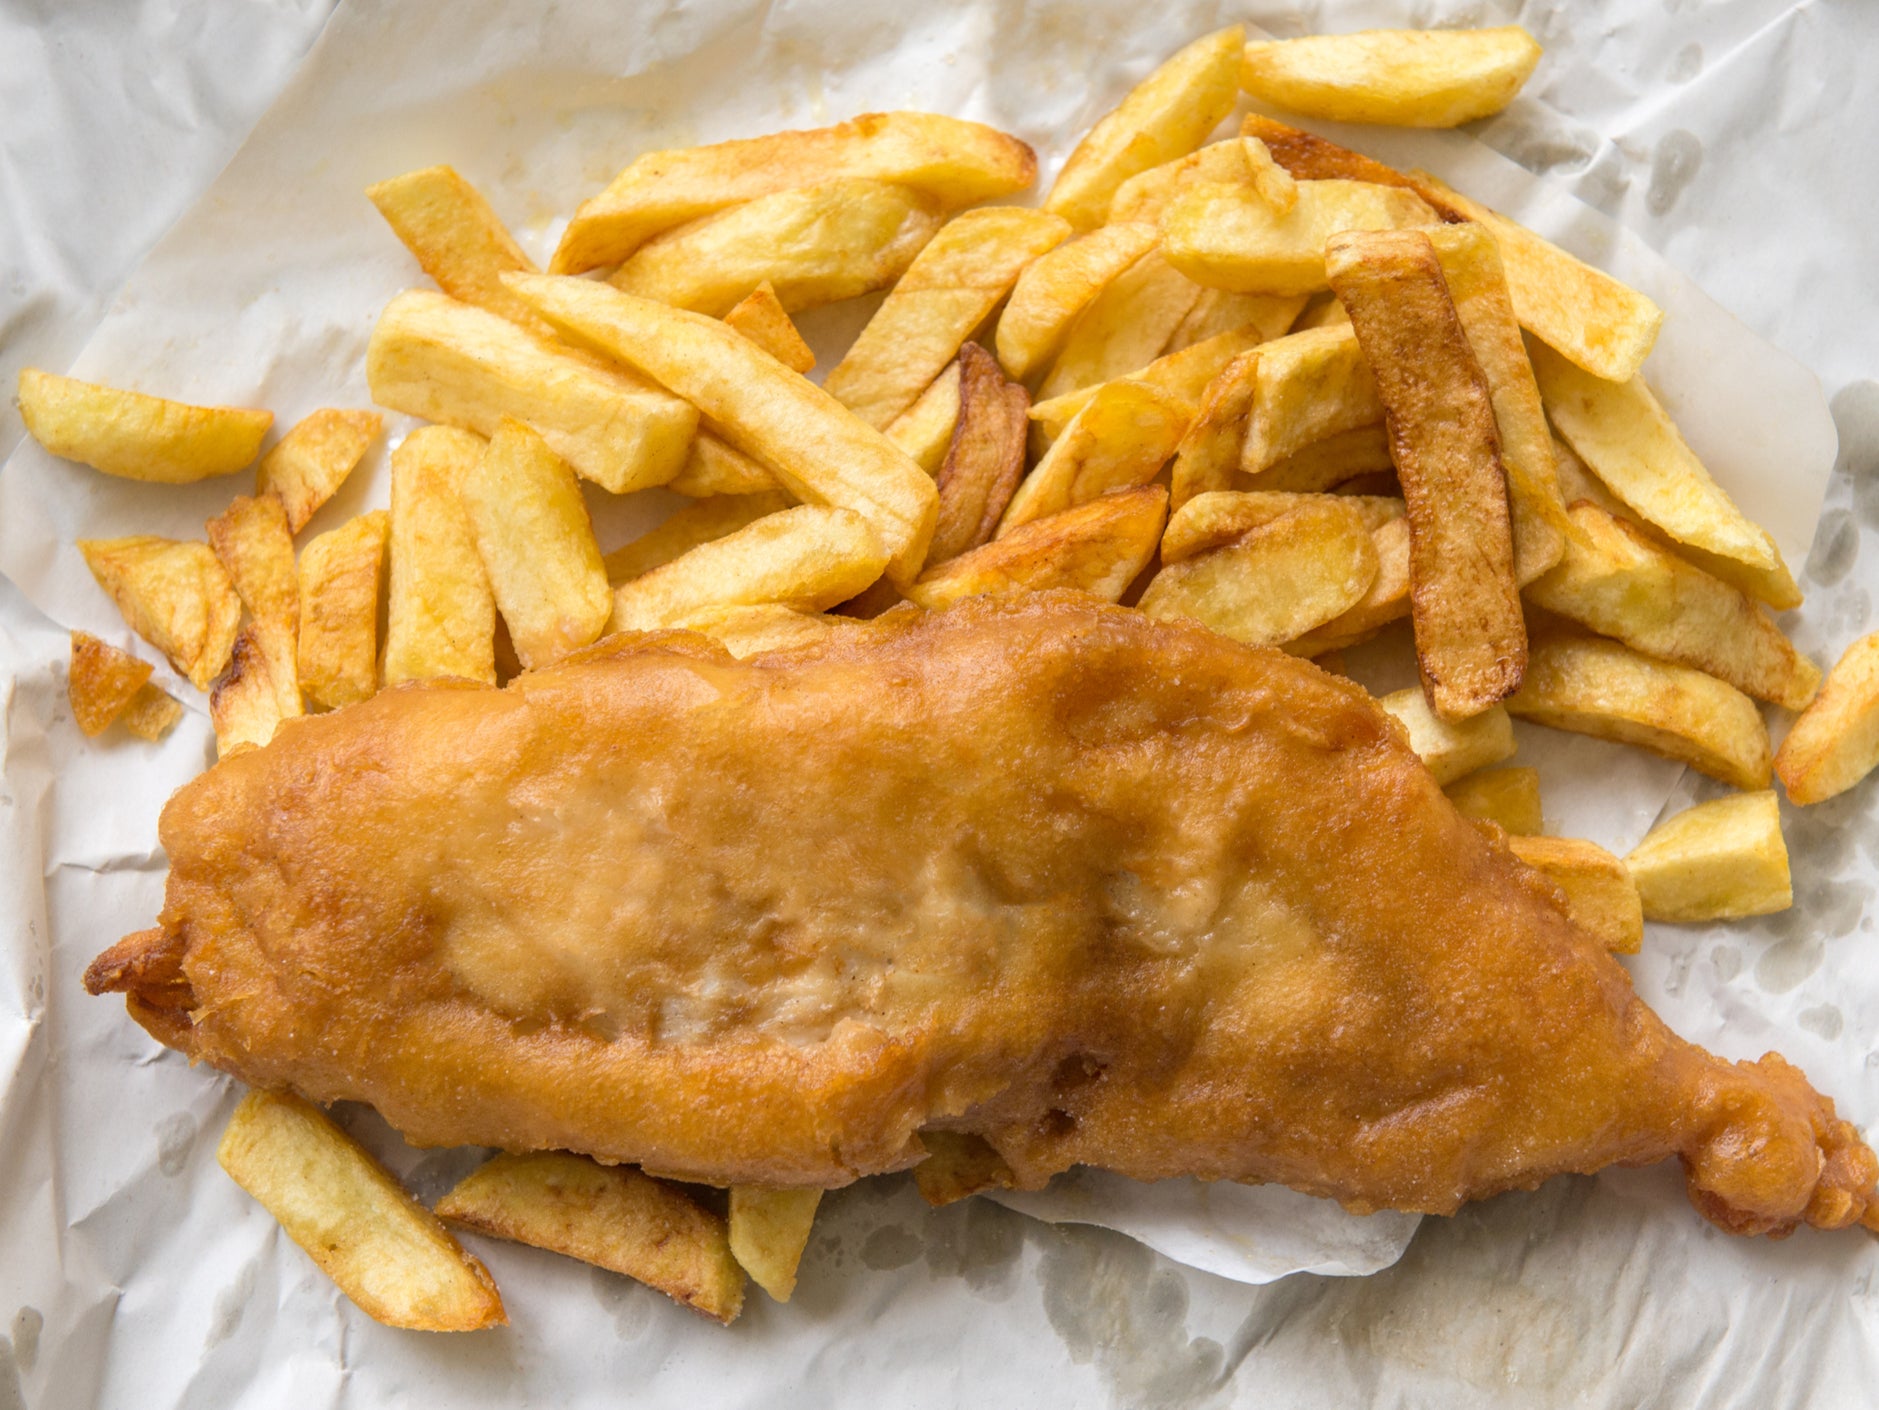 Fish and chips is a traditional British meal